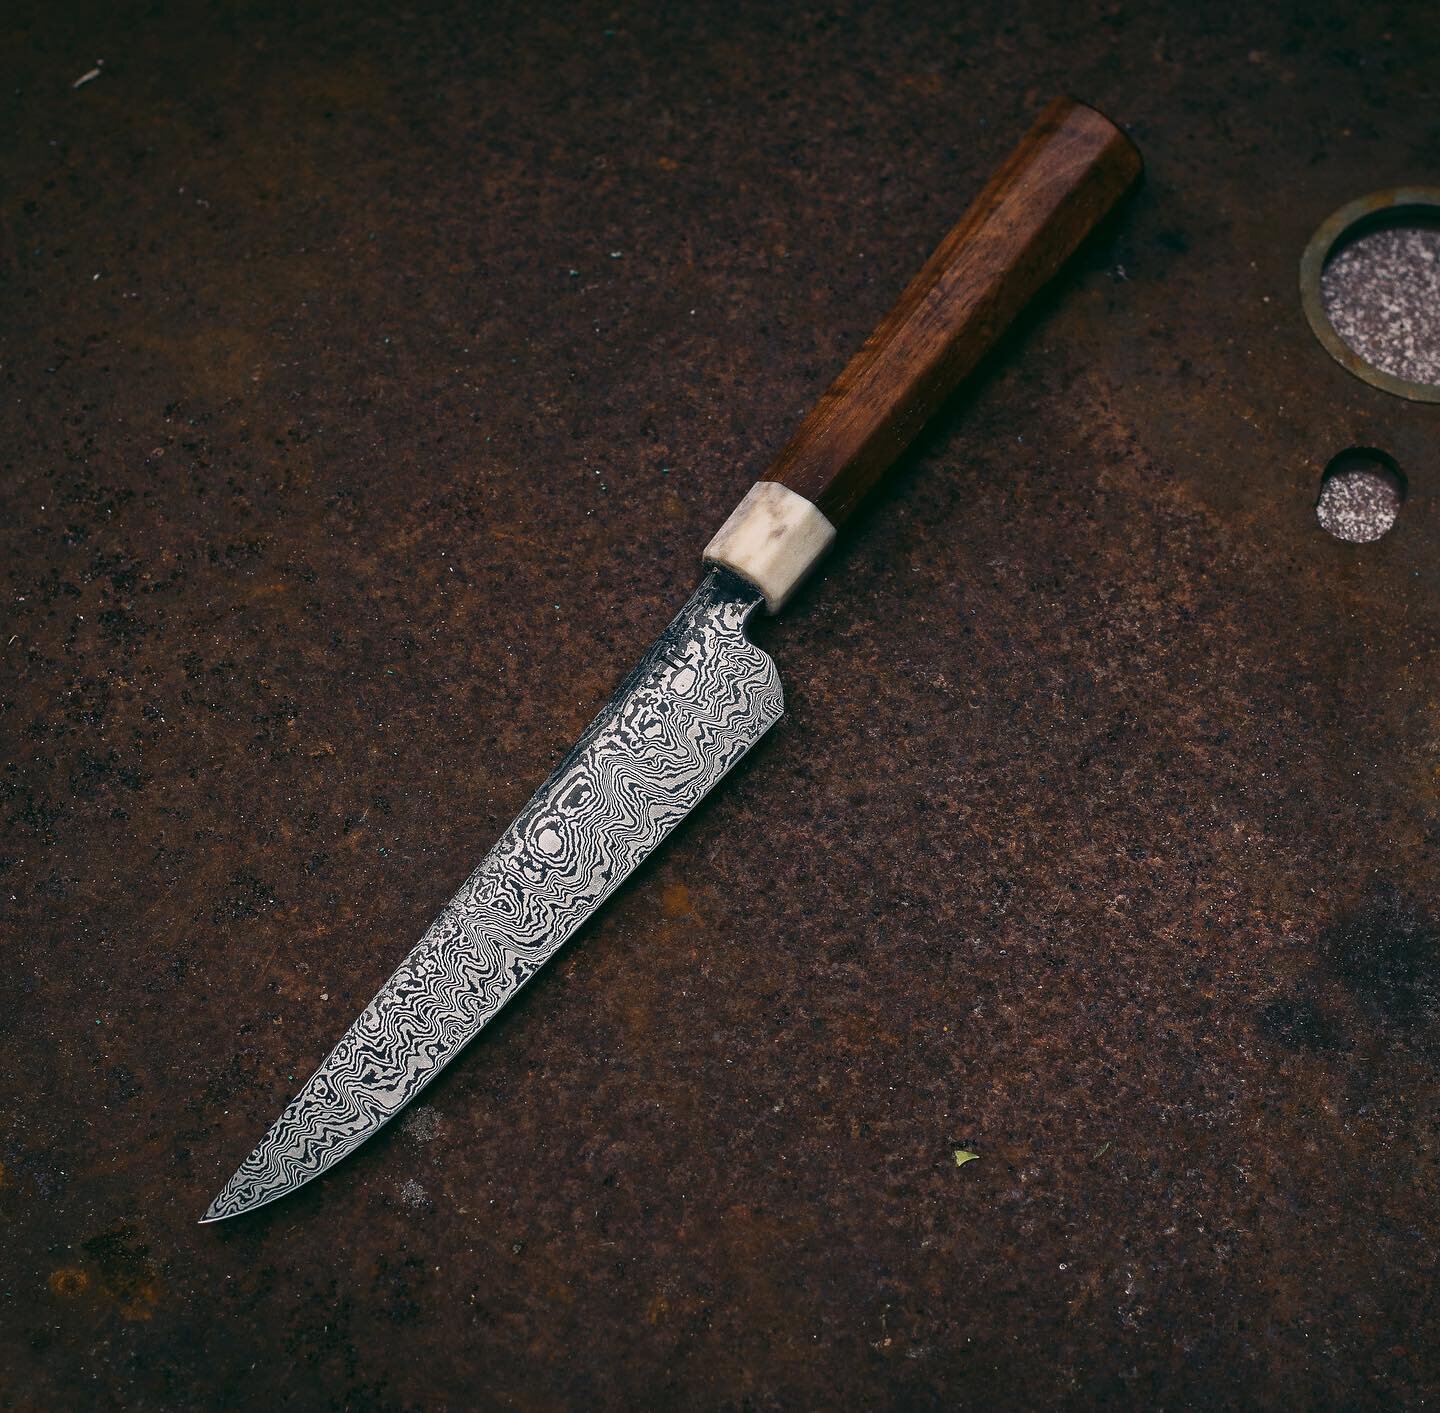 NEW KNIFE ALERT!

A new Hand-forged Damascus and Blackwood Boning Utility has just landed on our website.

What is a boning knife you ask?

A kitchen boning knife is shaped thinner than a usual kitchen knife, this helps it to remove meat from the bon